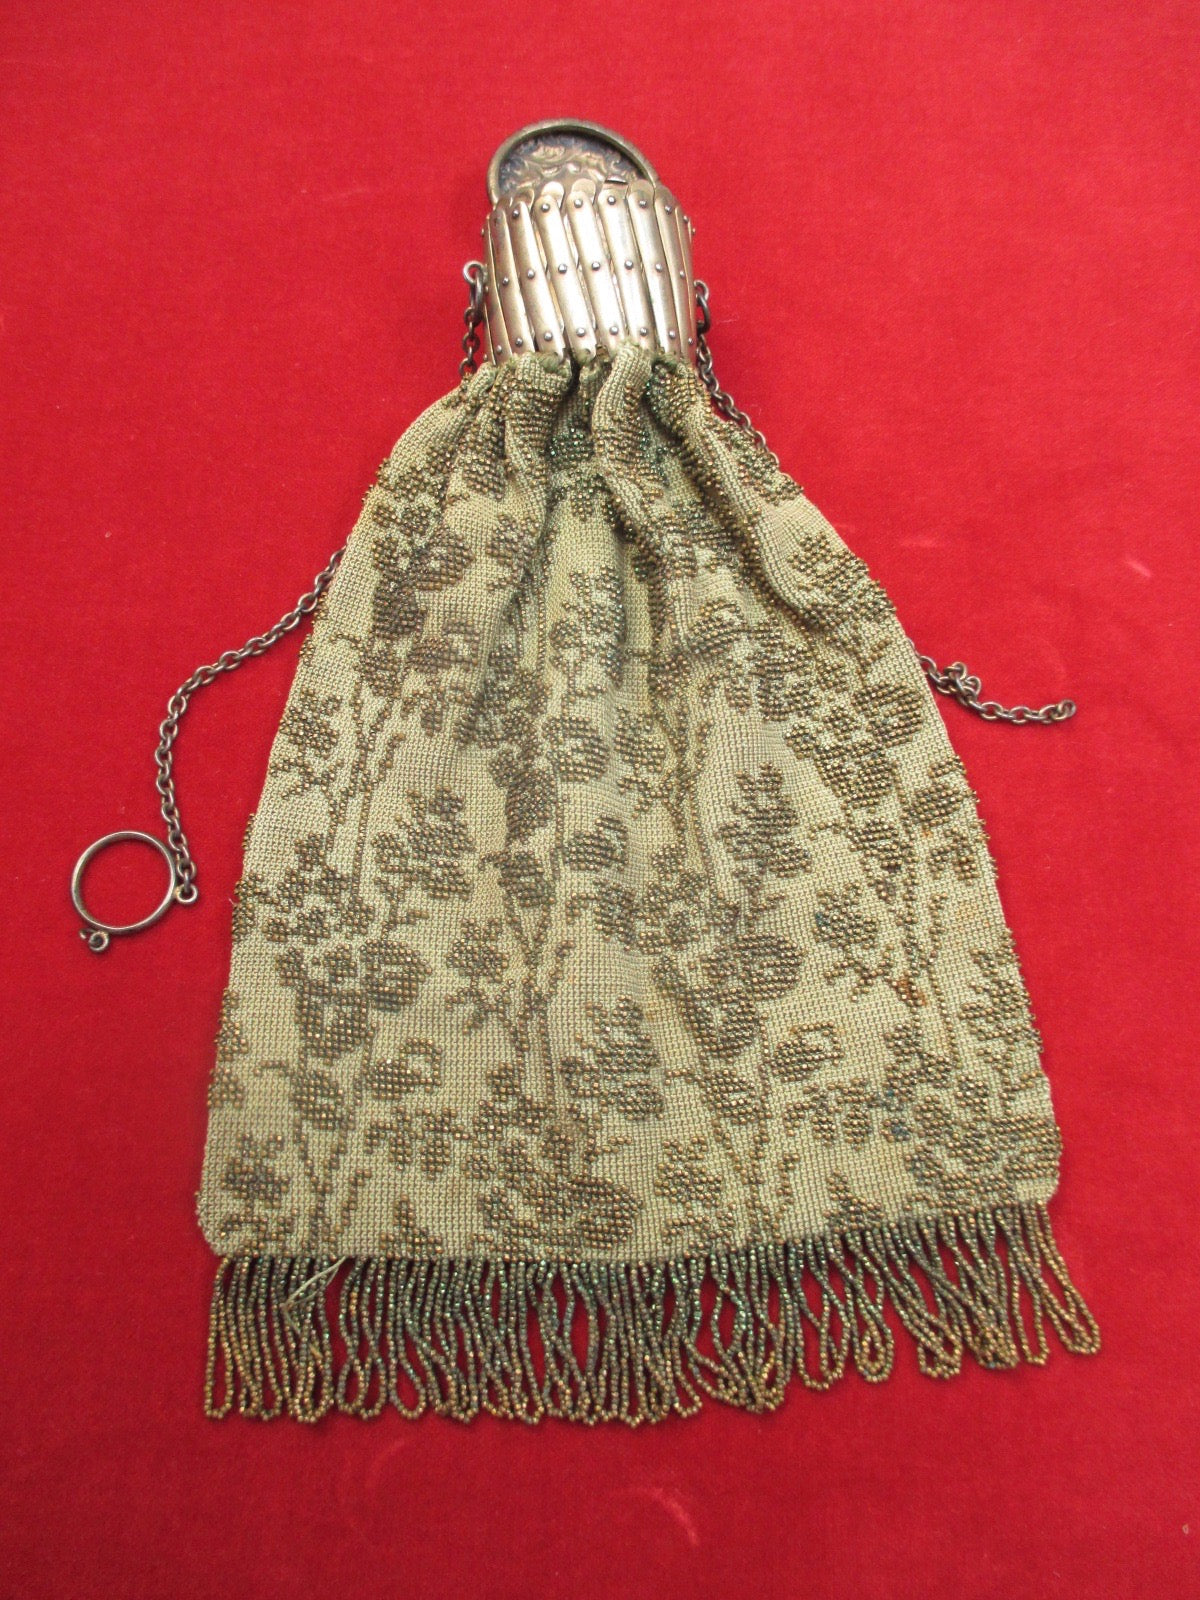 Antique Victorian purse fashioned of Beaded Mesh